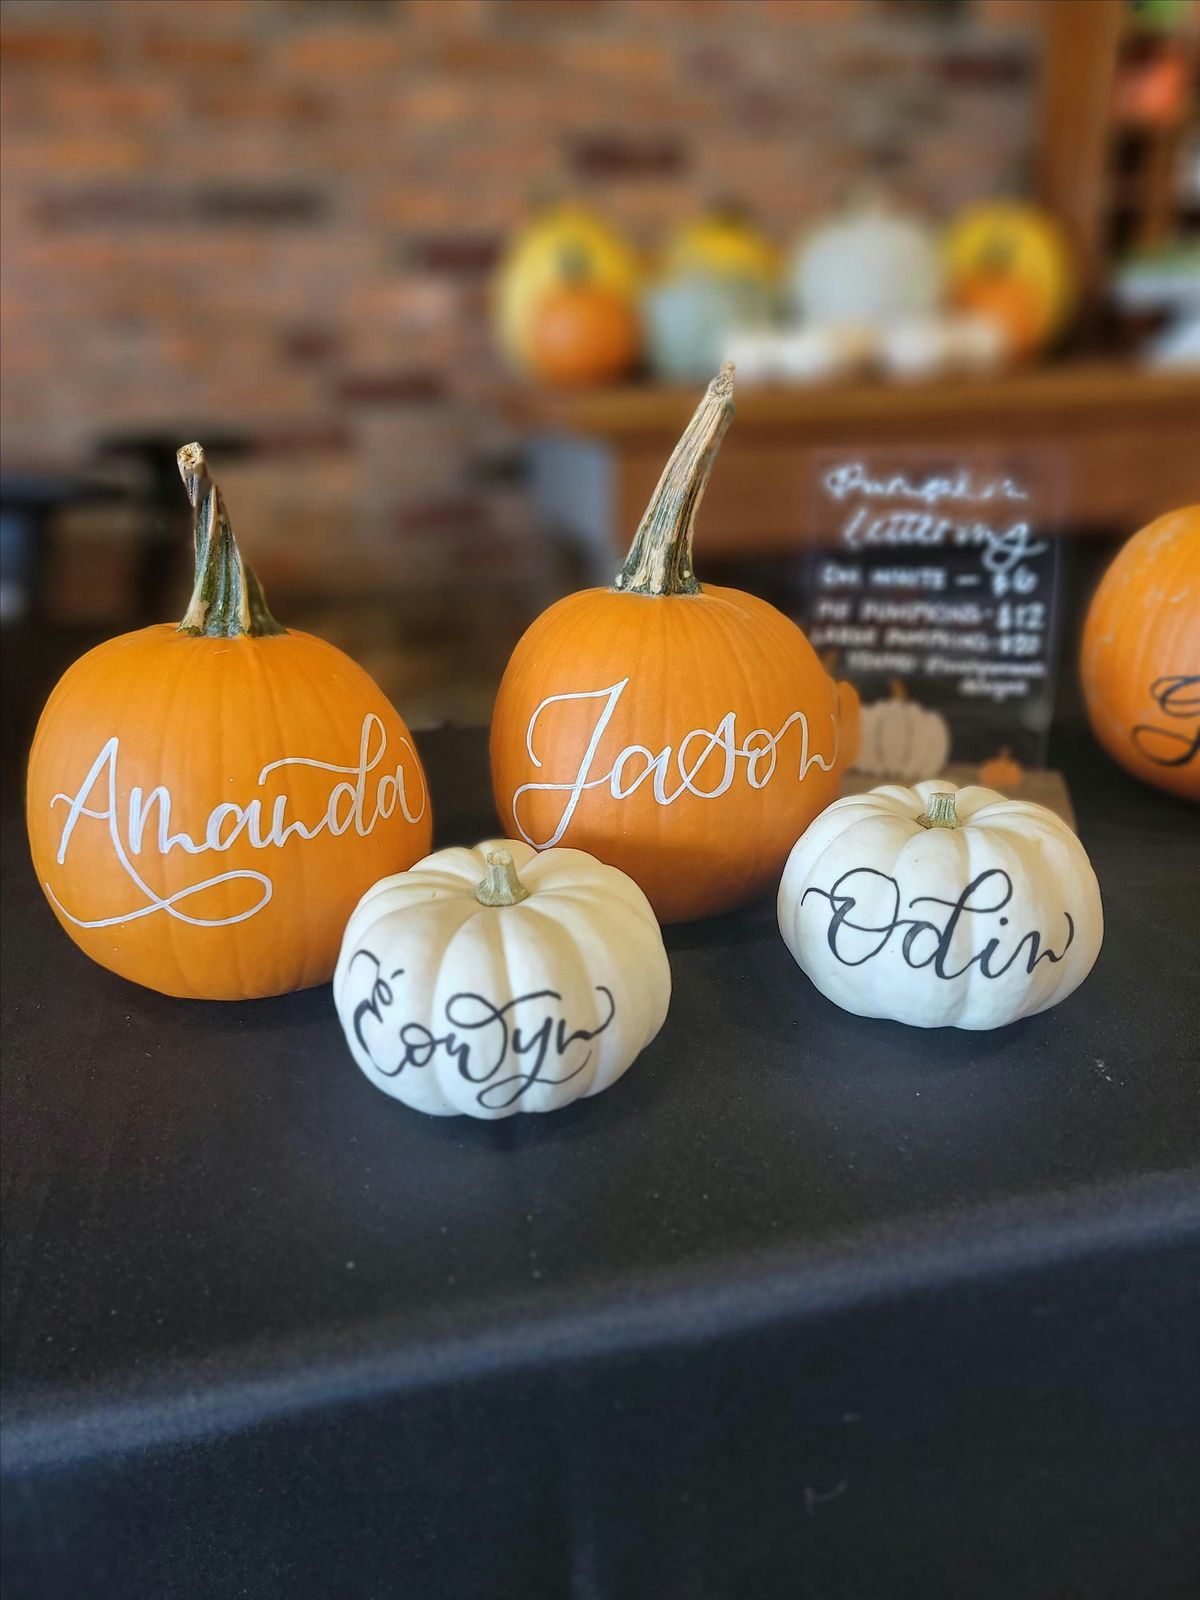 Intro to Handlettering & Pumpkin Lettering with Lovely Arrows Designs